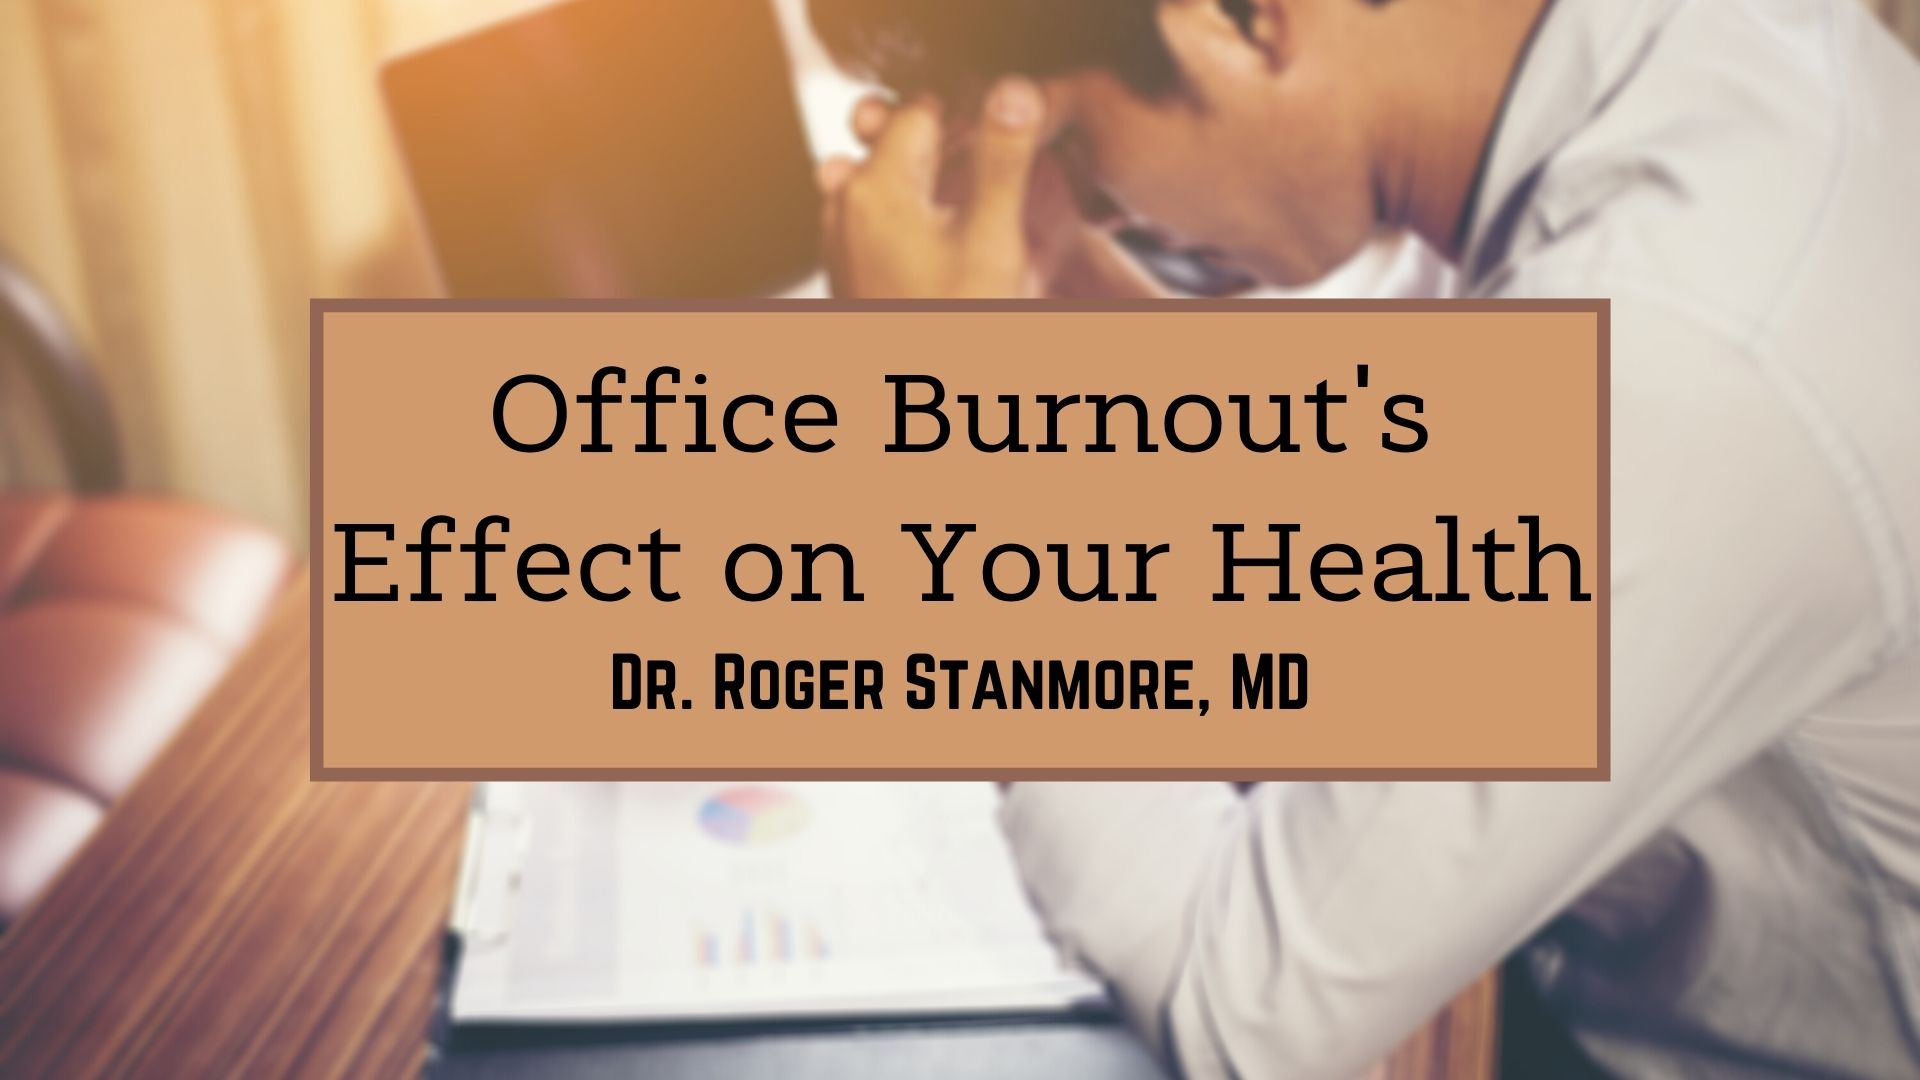 Dr. Roger Stanmore, MD burnout